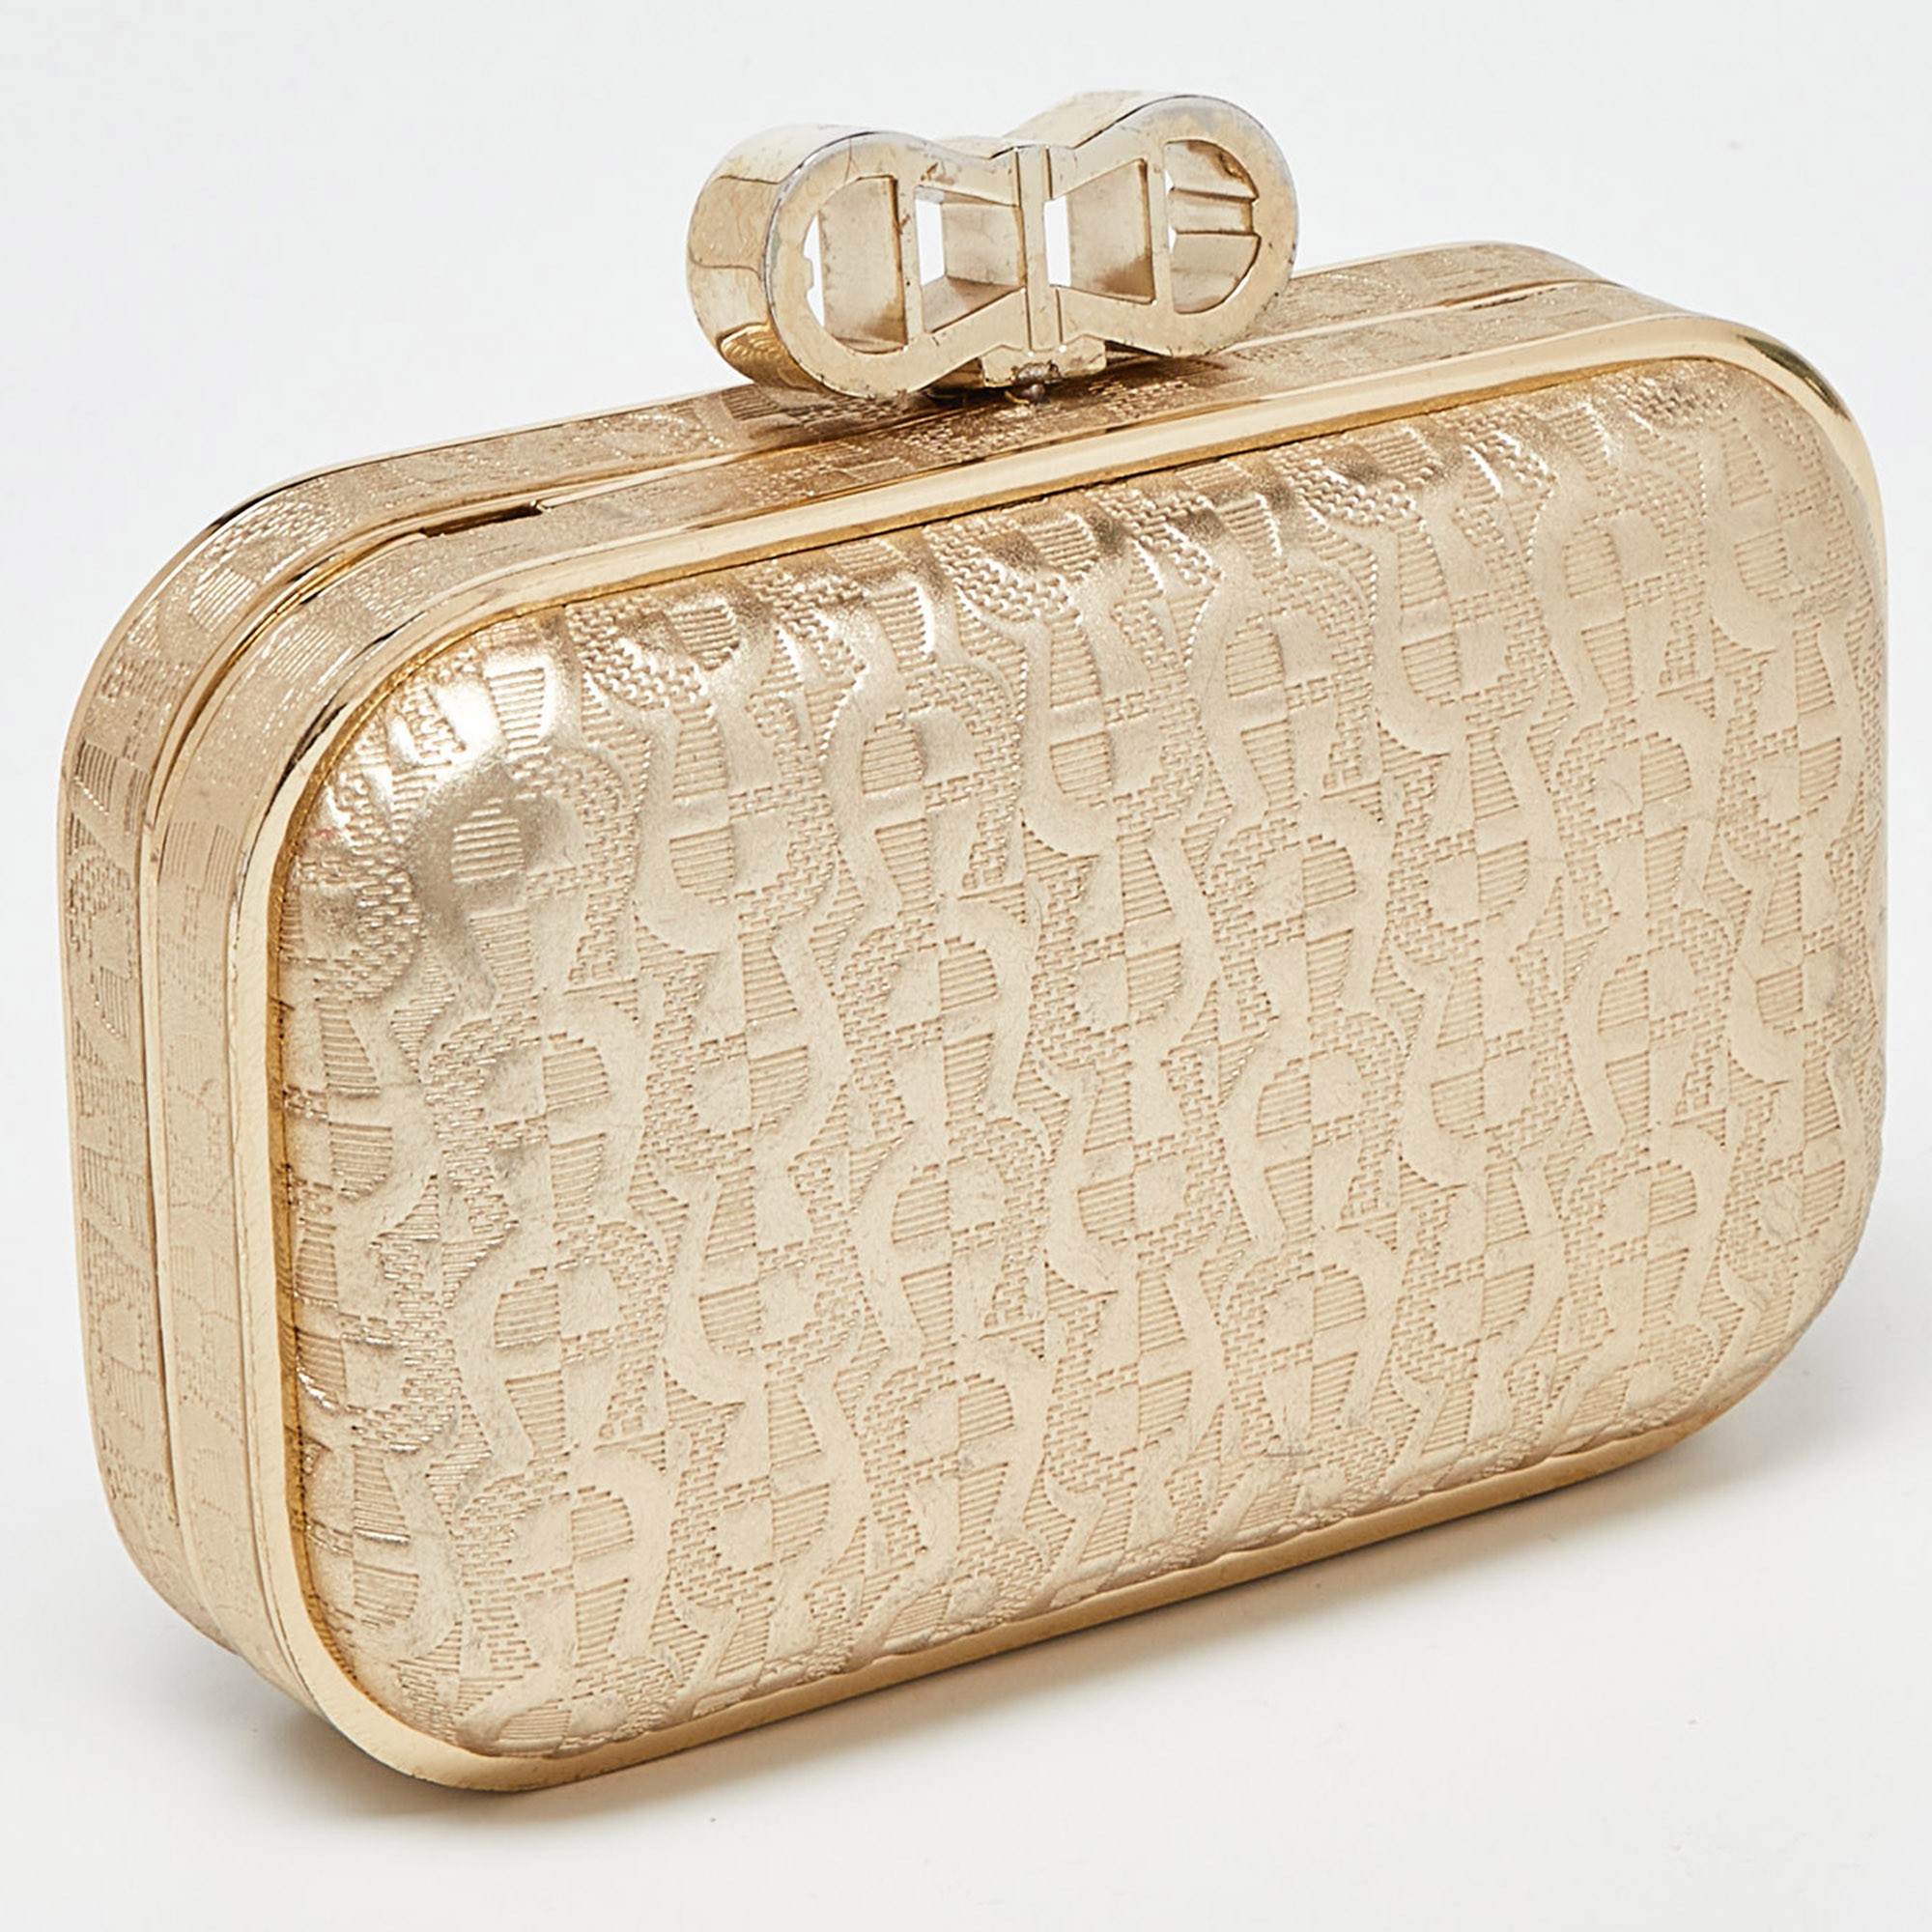 Aigner Gold Embossed Leather Box Clutch